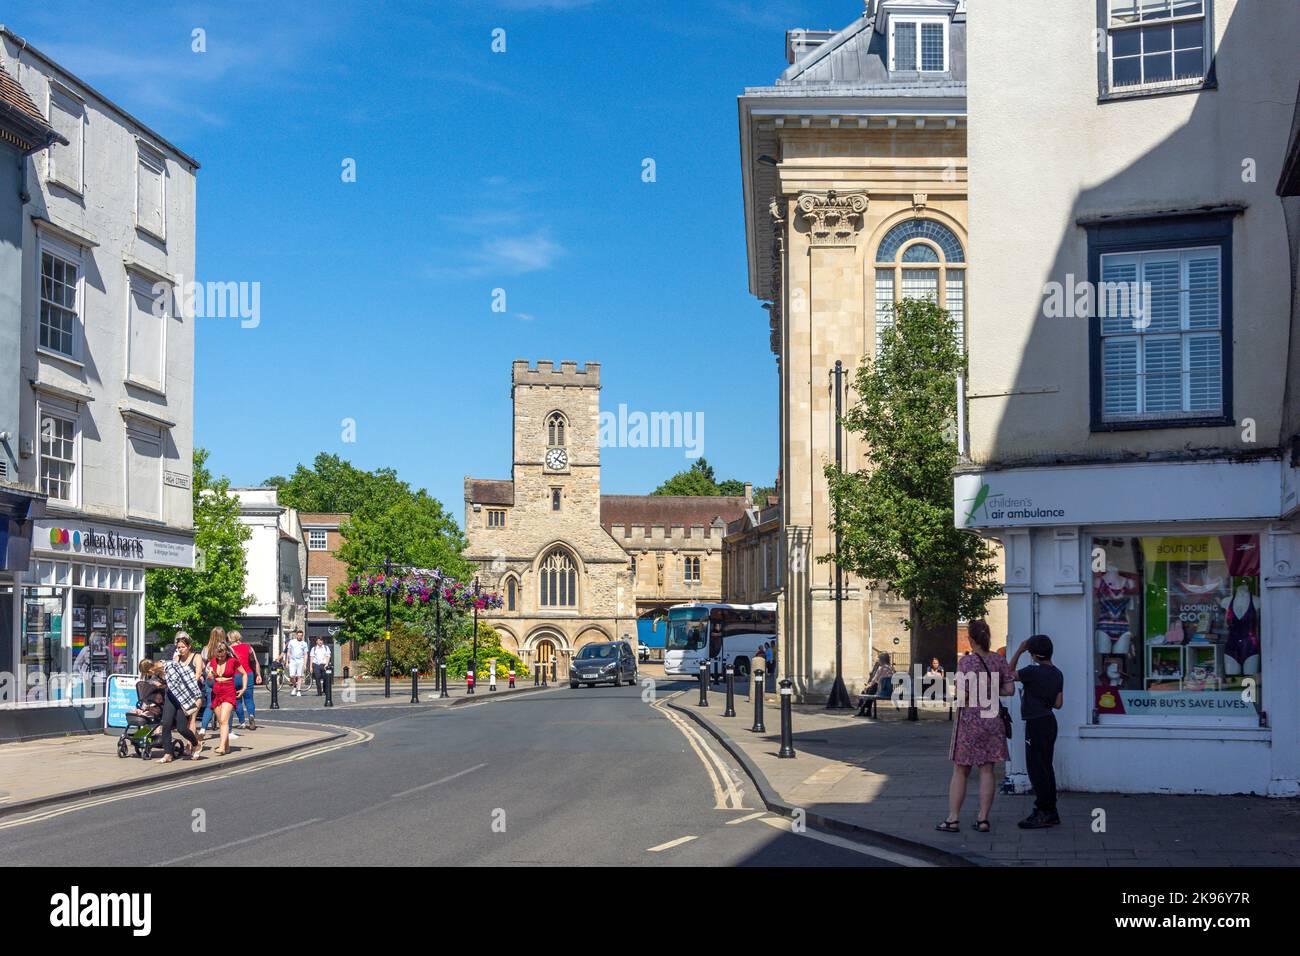 Market Place from High Street, Abingdon-on-Thames, Oxfordshire, England, United Kingdom Stock Photo